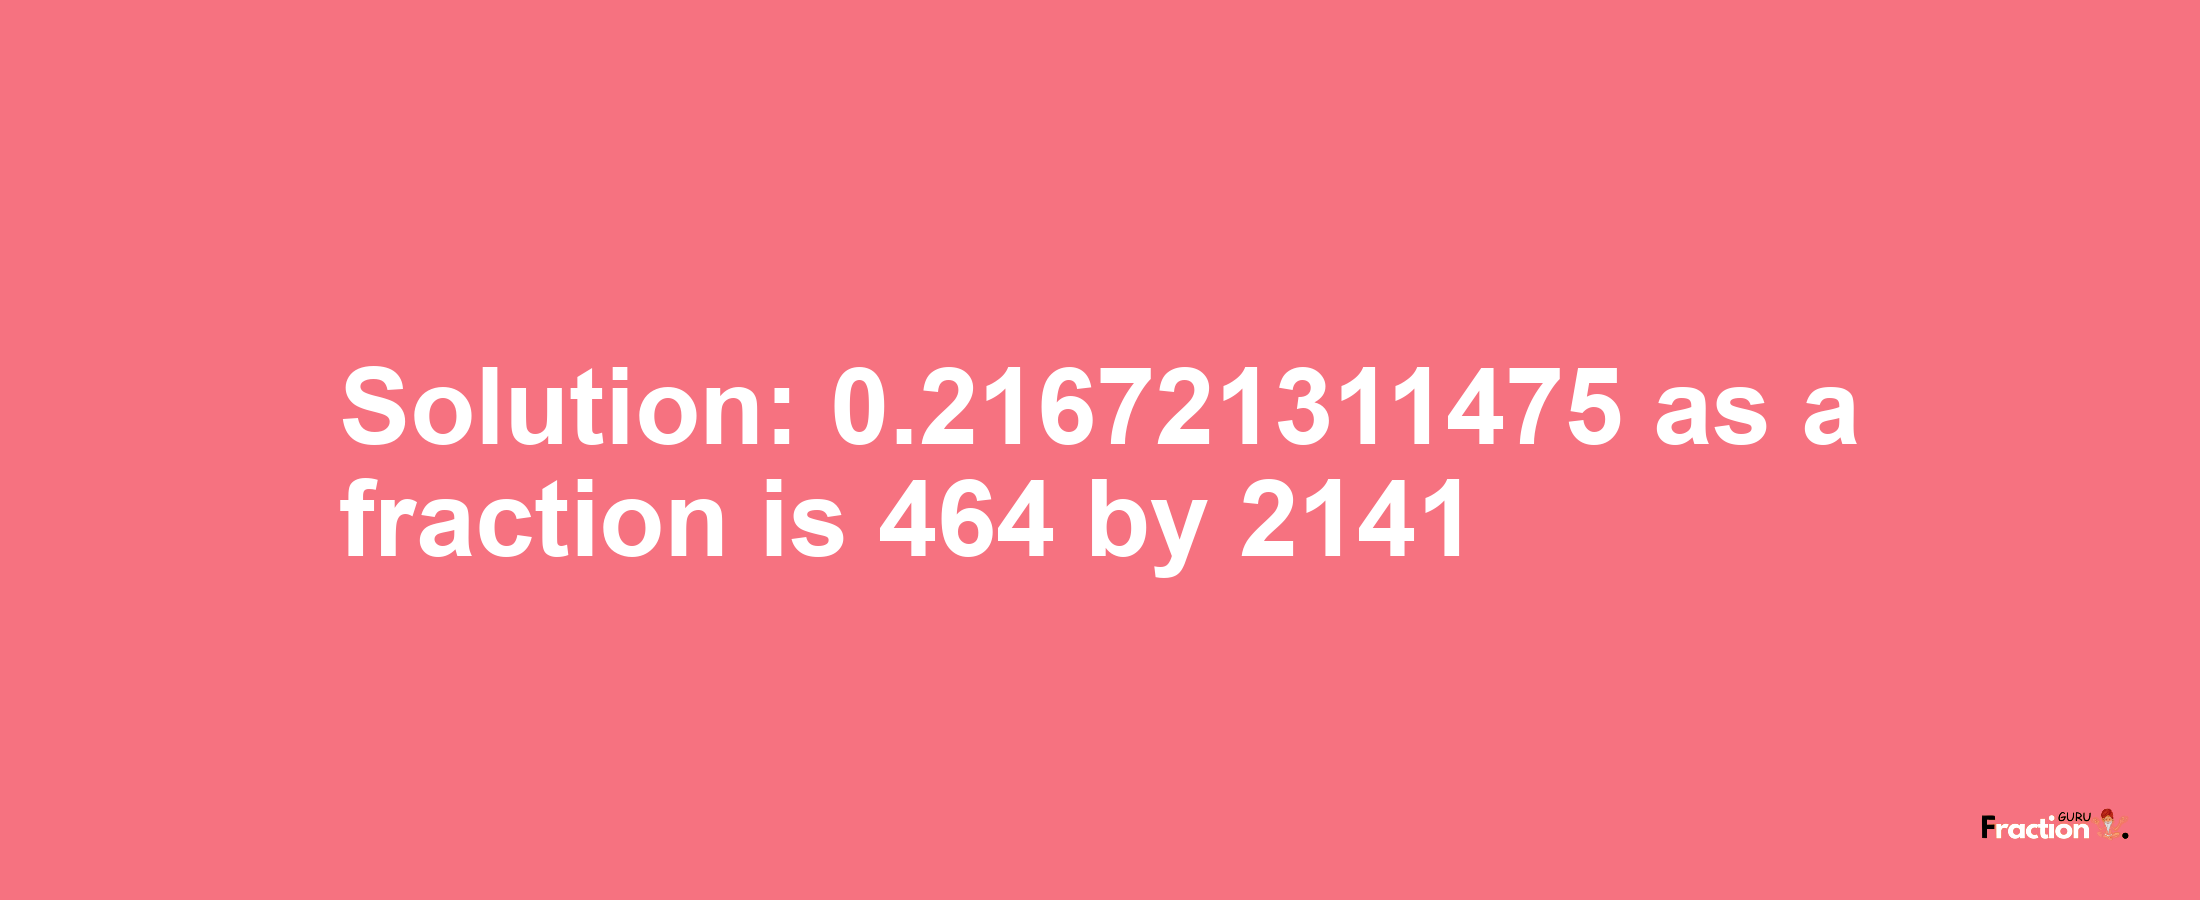 Solution:0.216721311475 as a fraction is 464/2141